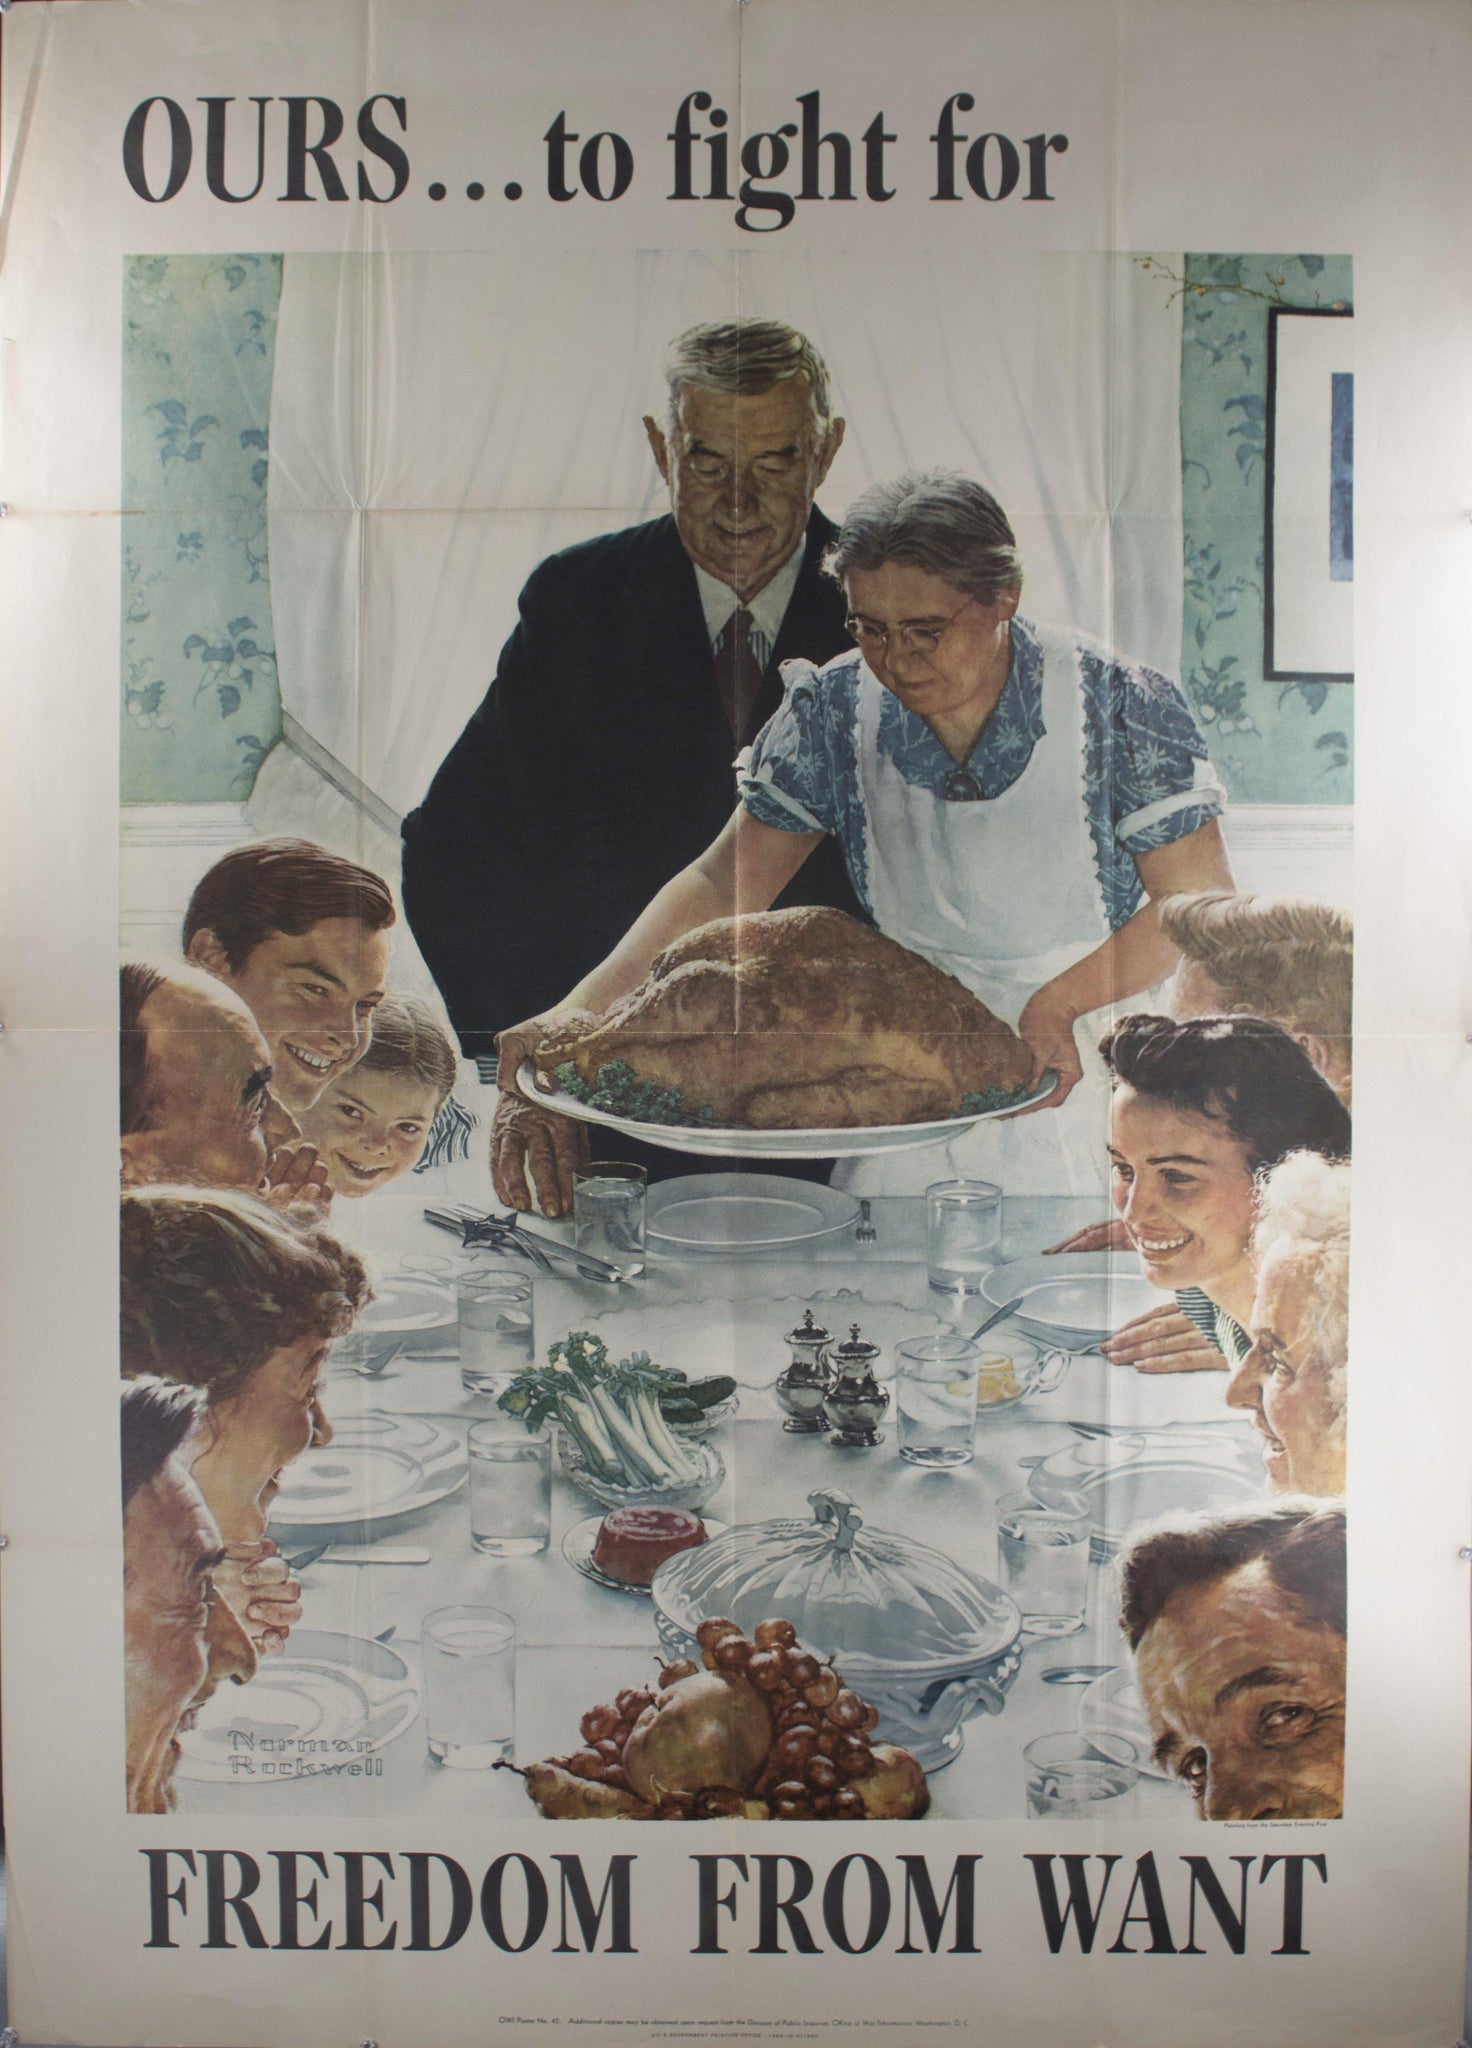 1942 Ours to fight for Freedom from Want by Norman Rockwell 57" x 40" - Golden Age Posters